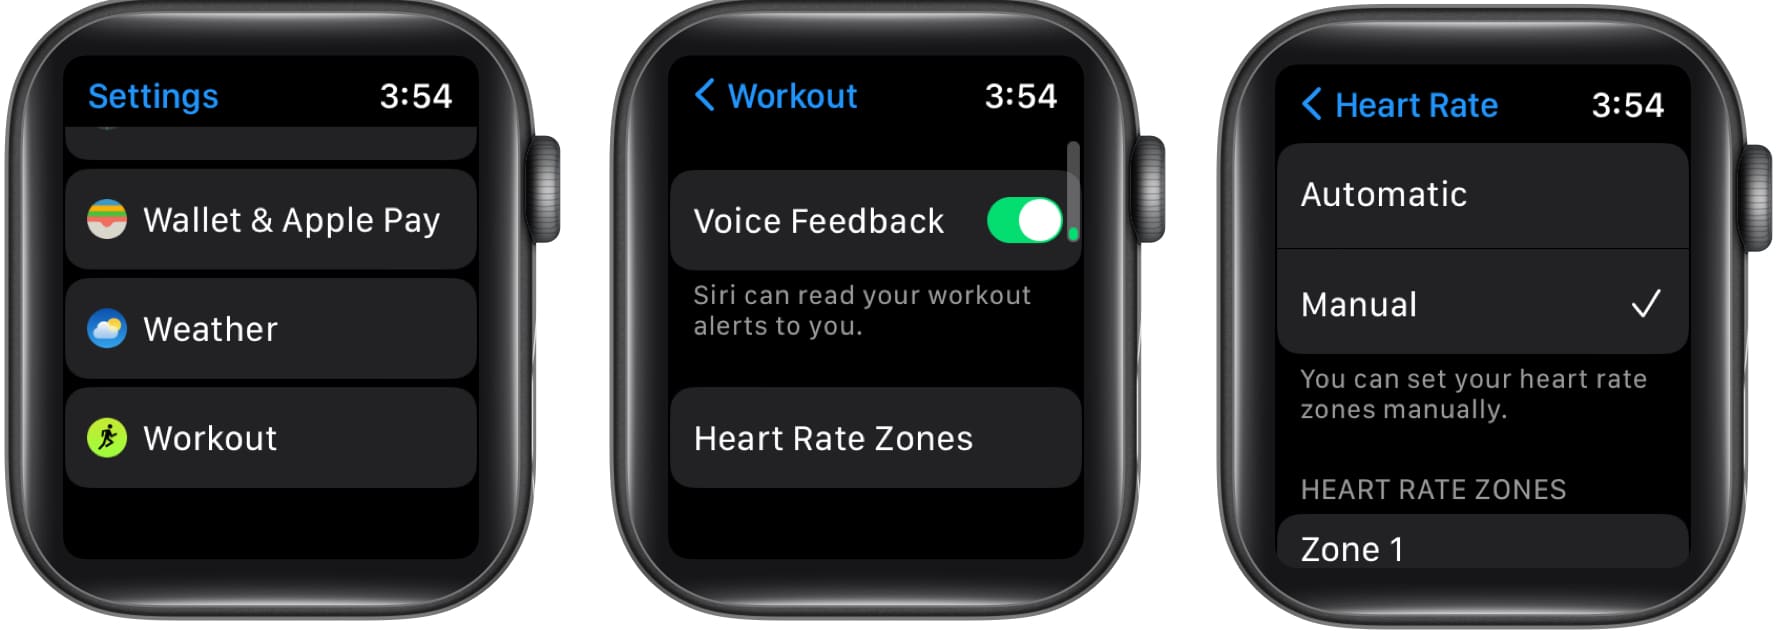 Tap Manual on Heart Rate on Apple Watch